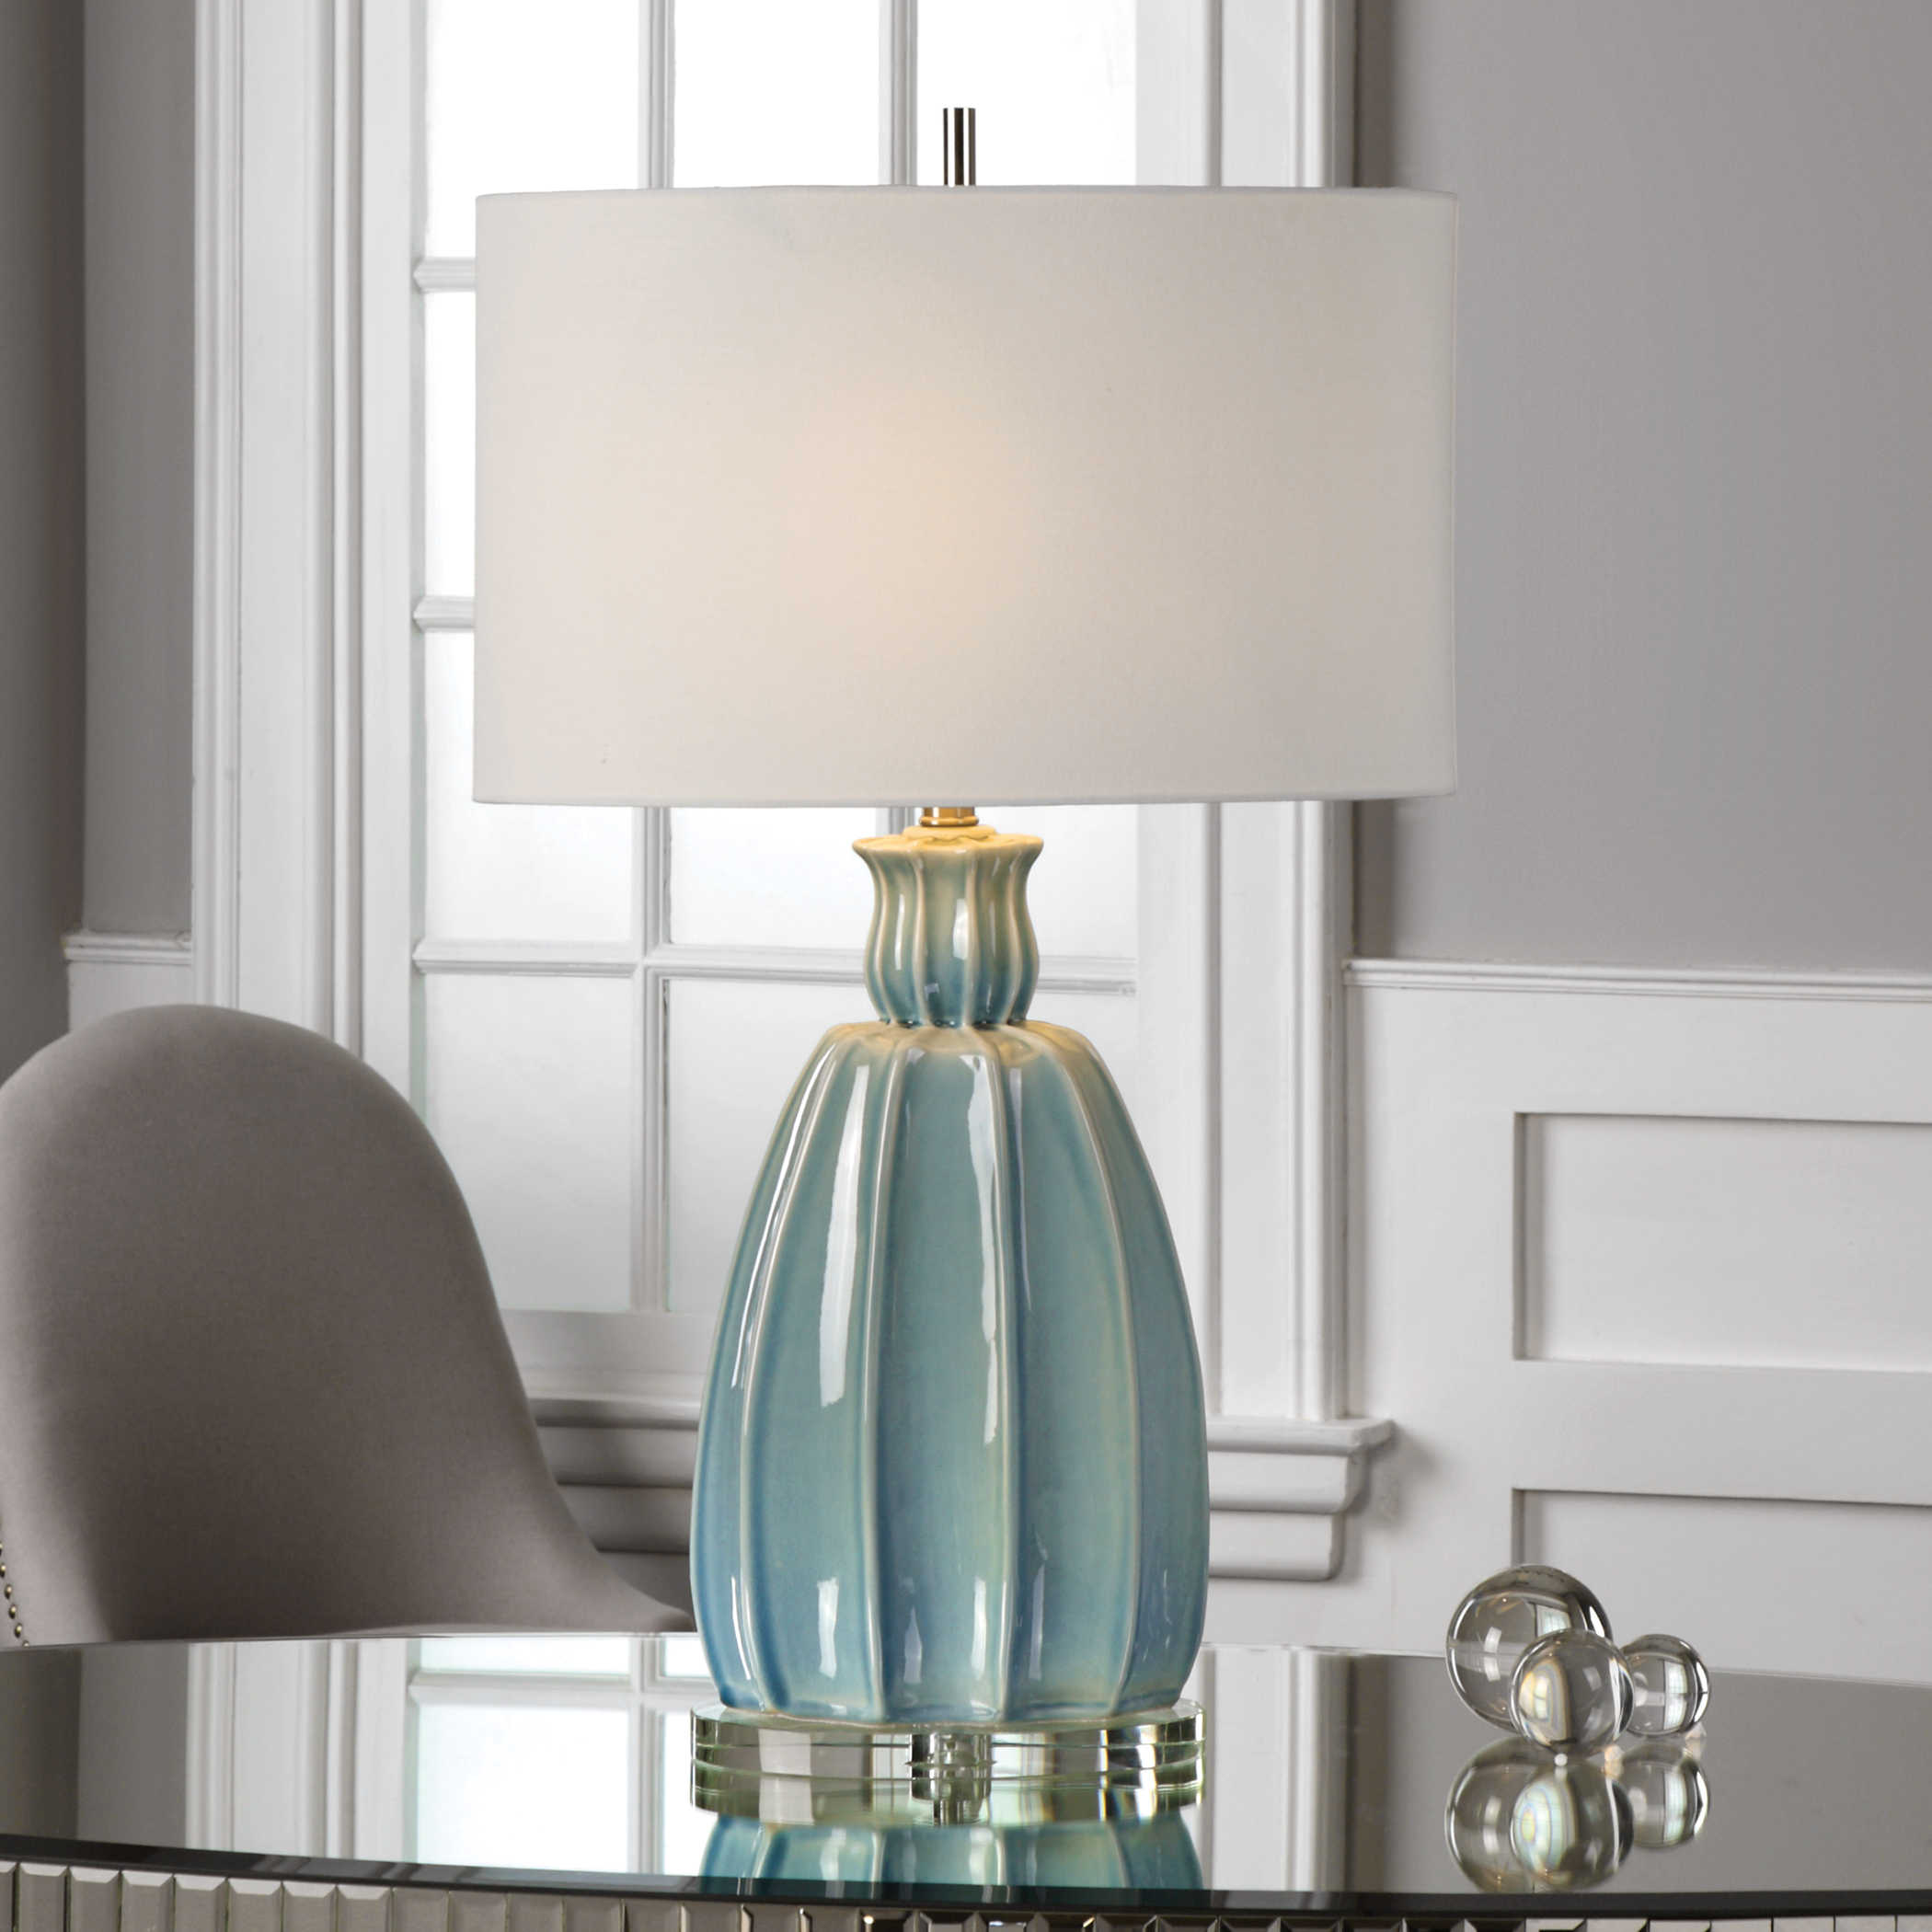 Suzanette Table Lamp Uttermost, Uttermost Marius Table Lamp